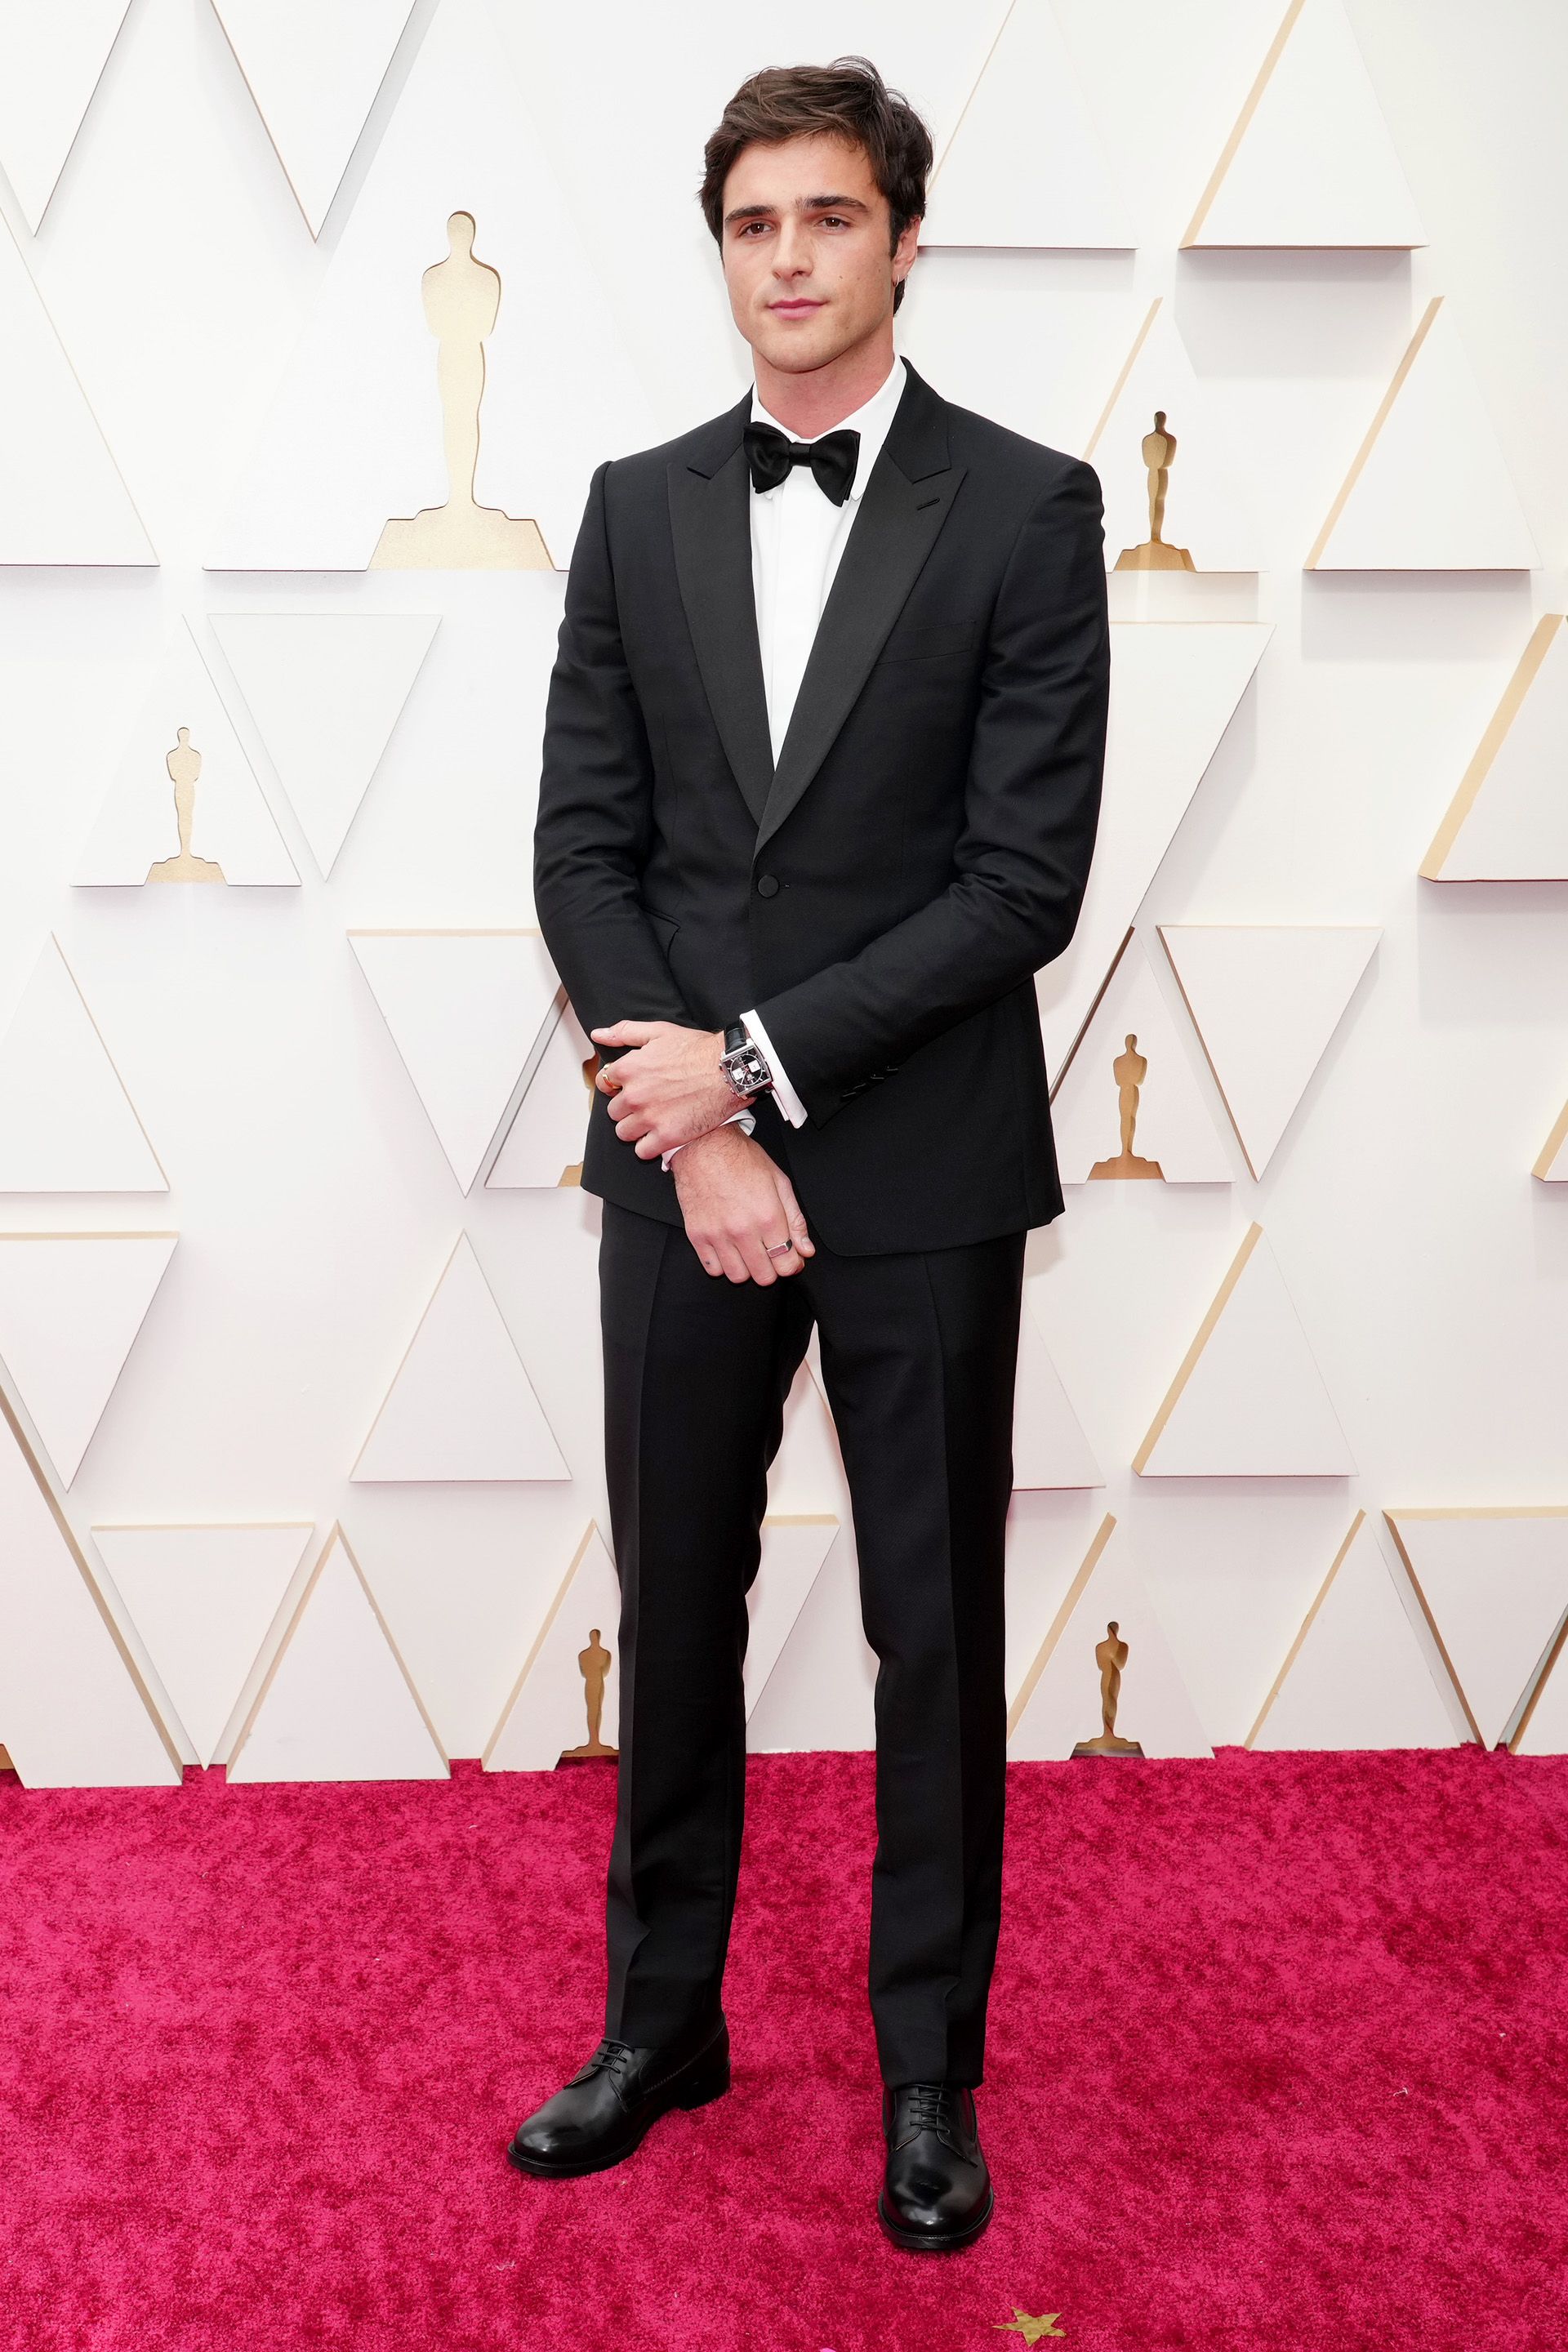 And the Oscar of Fashion Goes To: Menswear